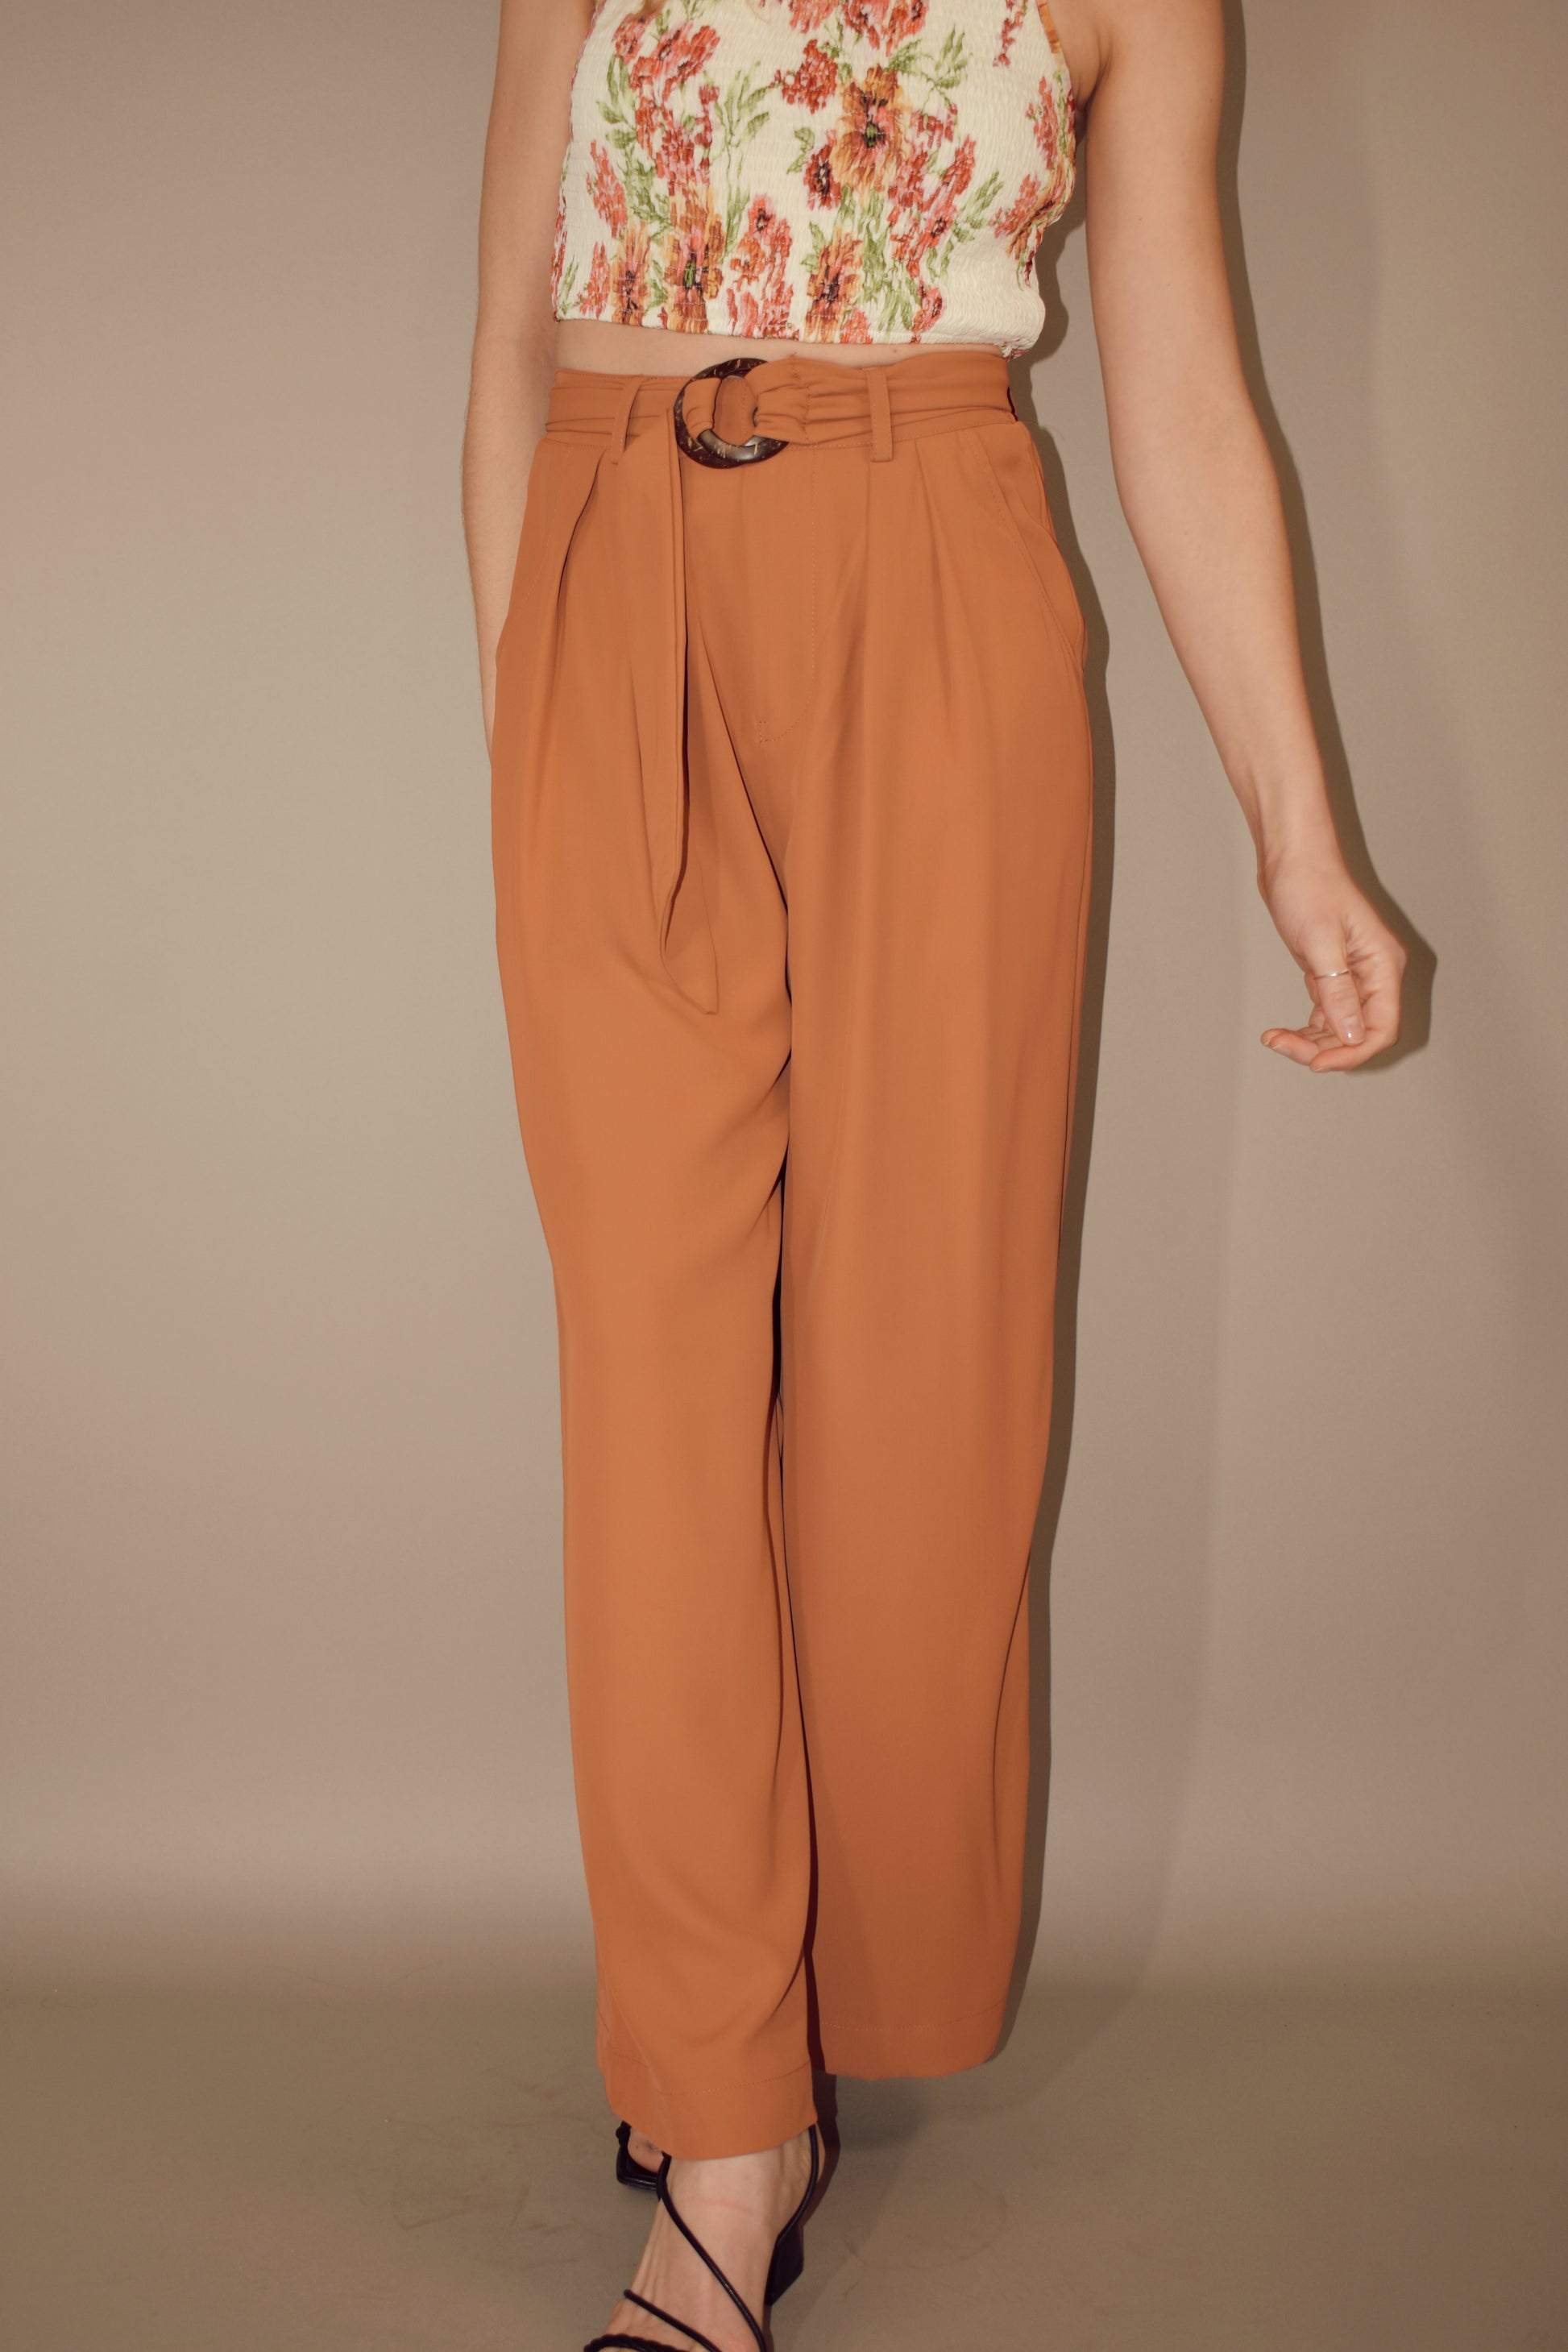 Wide leg pleated full length trousers with side pockets and an o ring knot belt. 